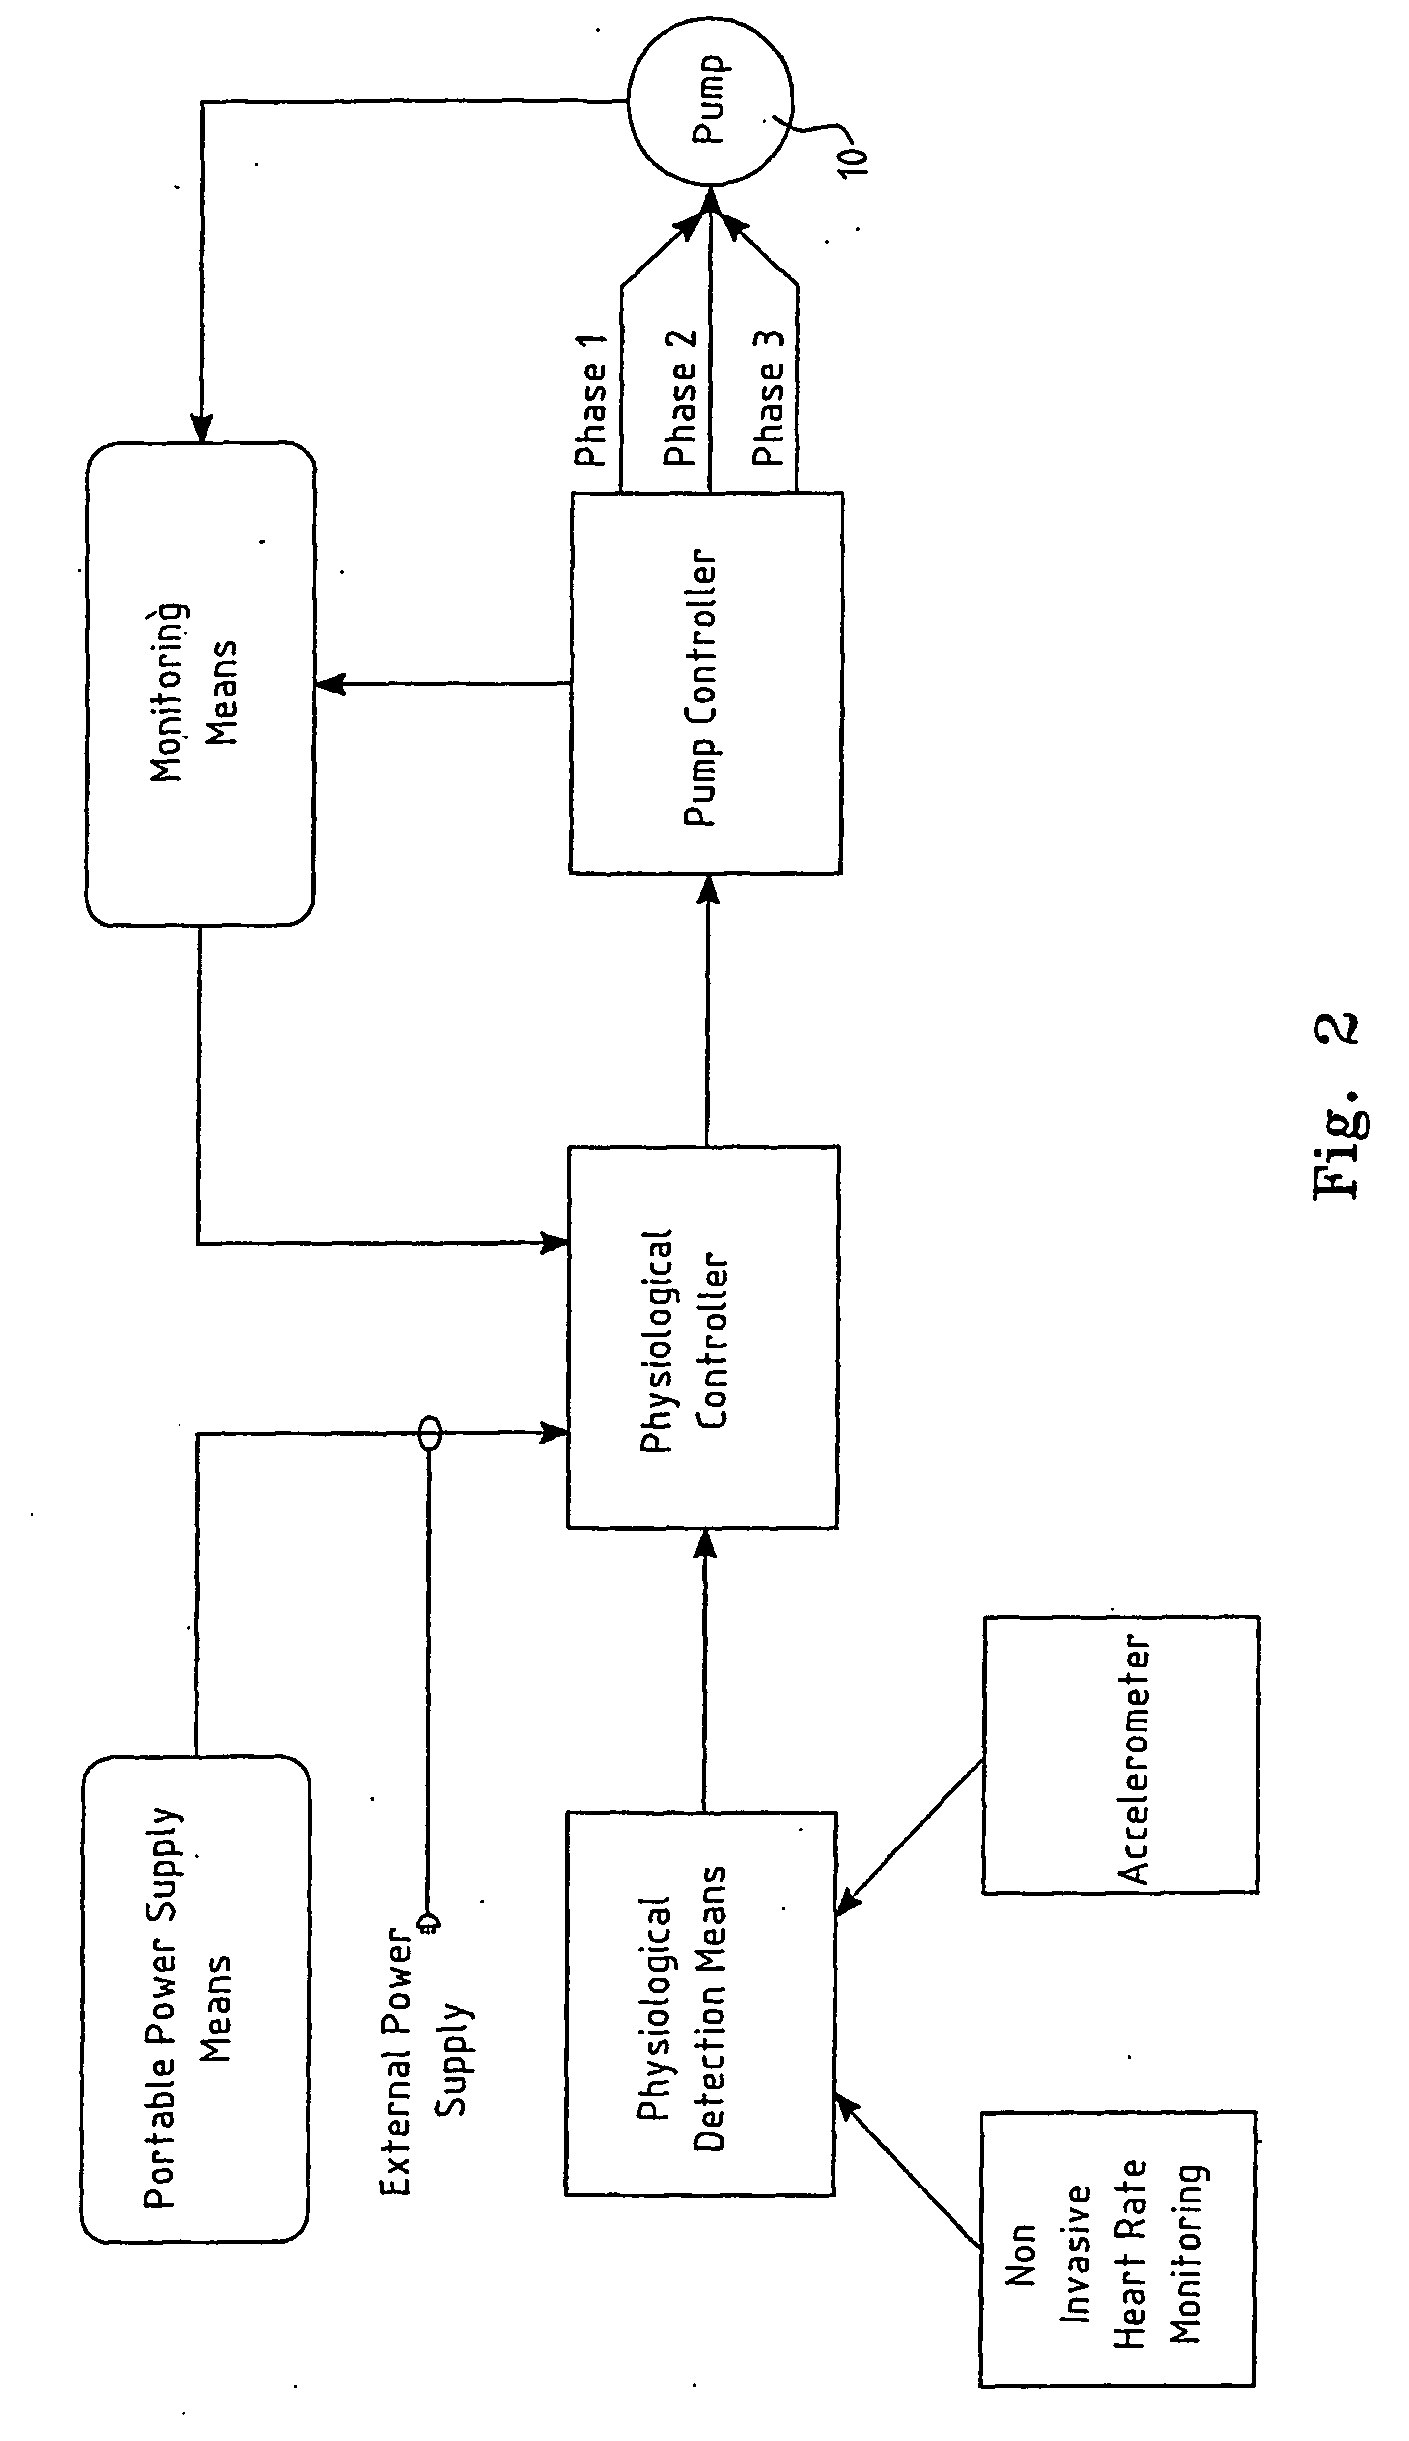 Physiological demand responsive control system